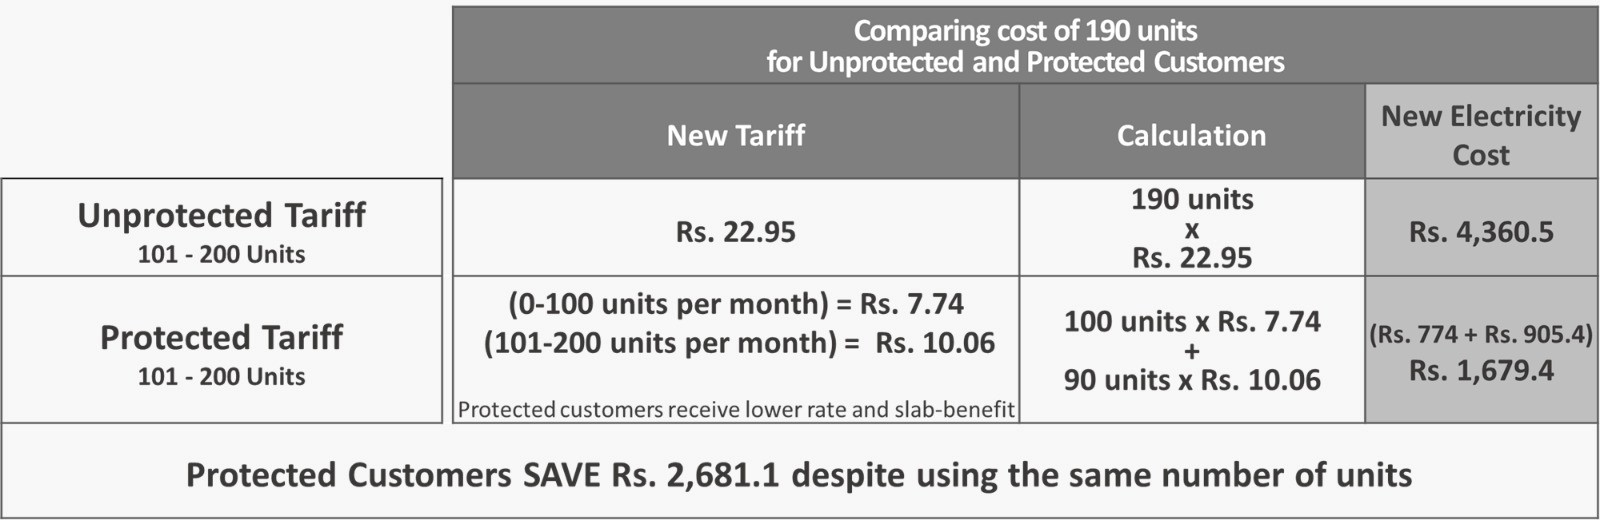 comparing-cost-of-190-units-protected-and-unprotected-customers